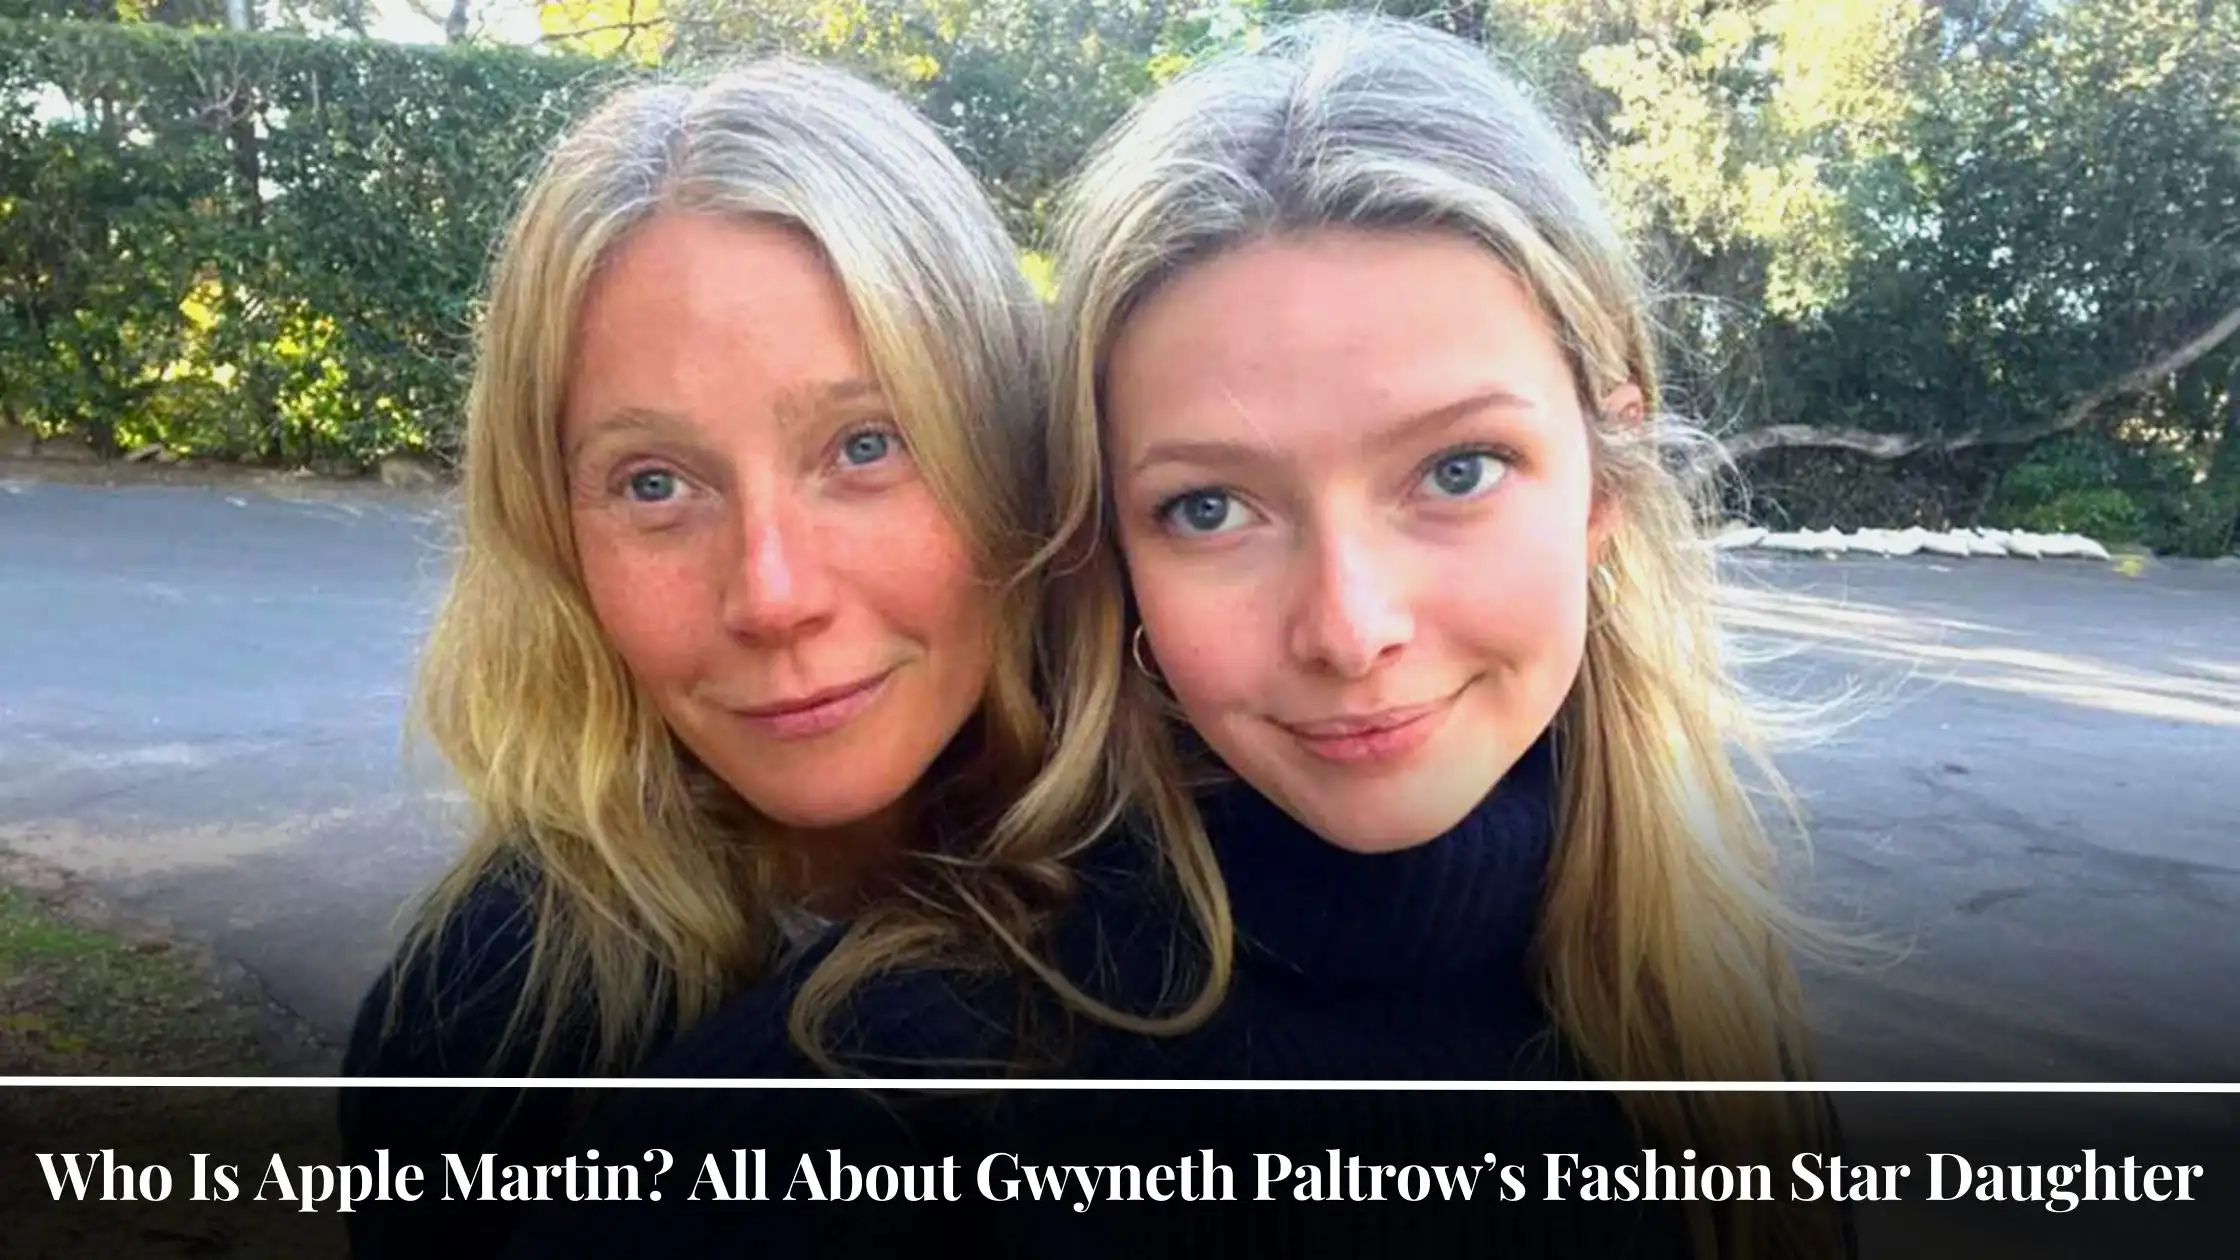 Who Is Apple Martin All About Gwyneth Paltrow’s Fashion Star Daughter